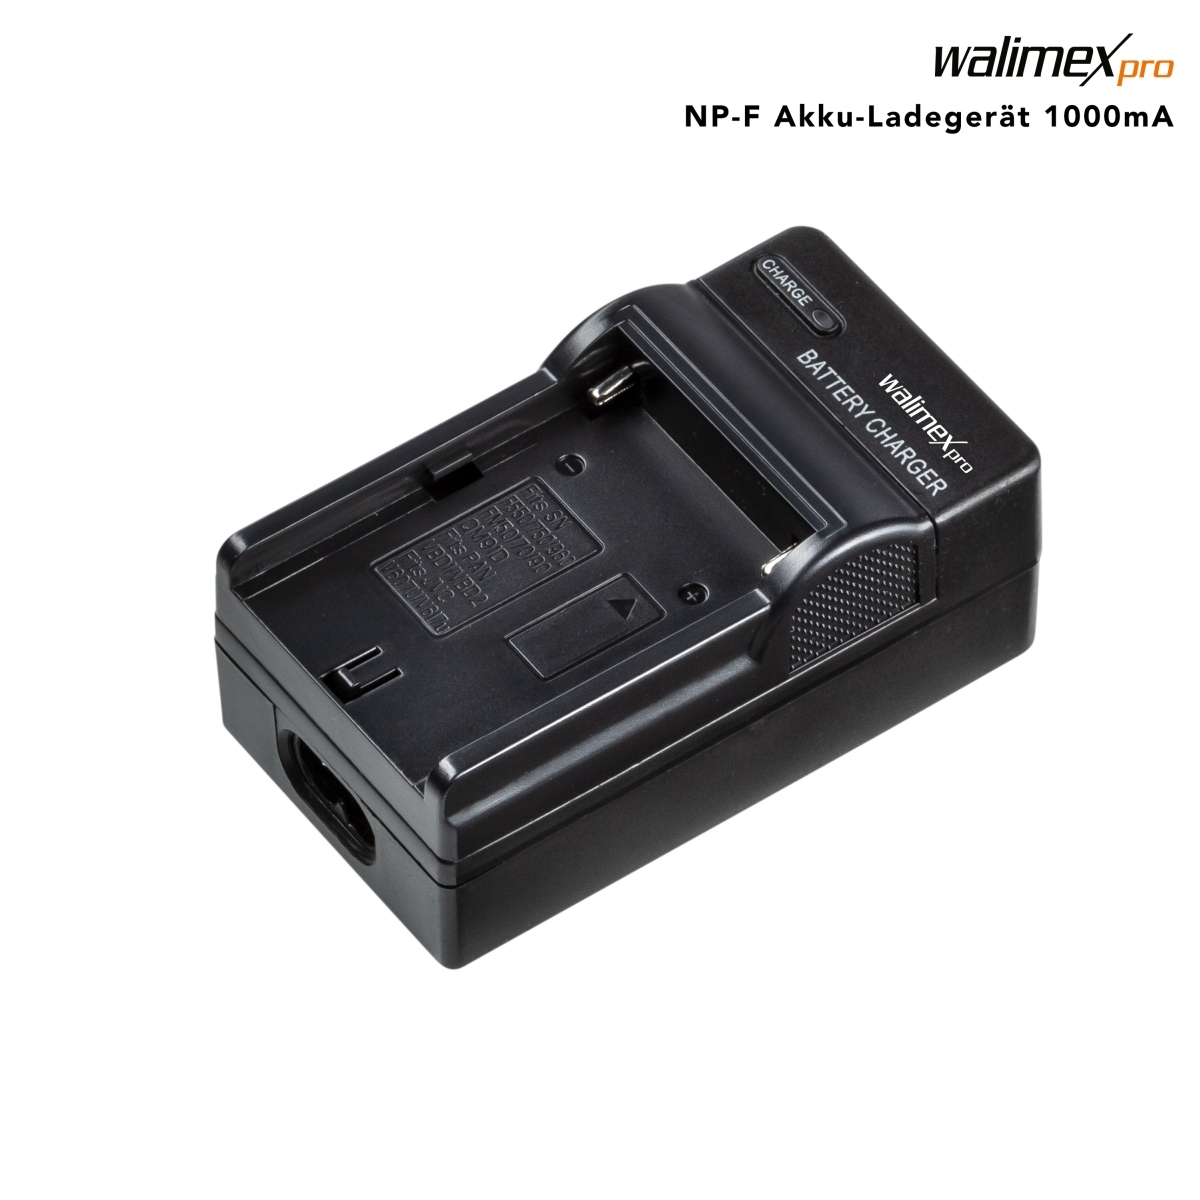 Walimex pro NP-F battery charger 1000mA